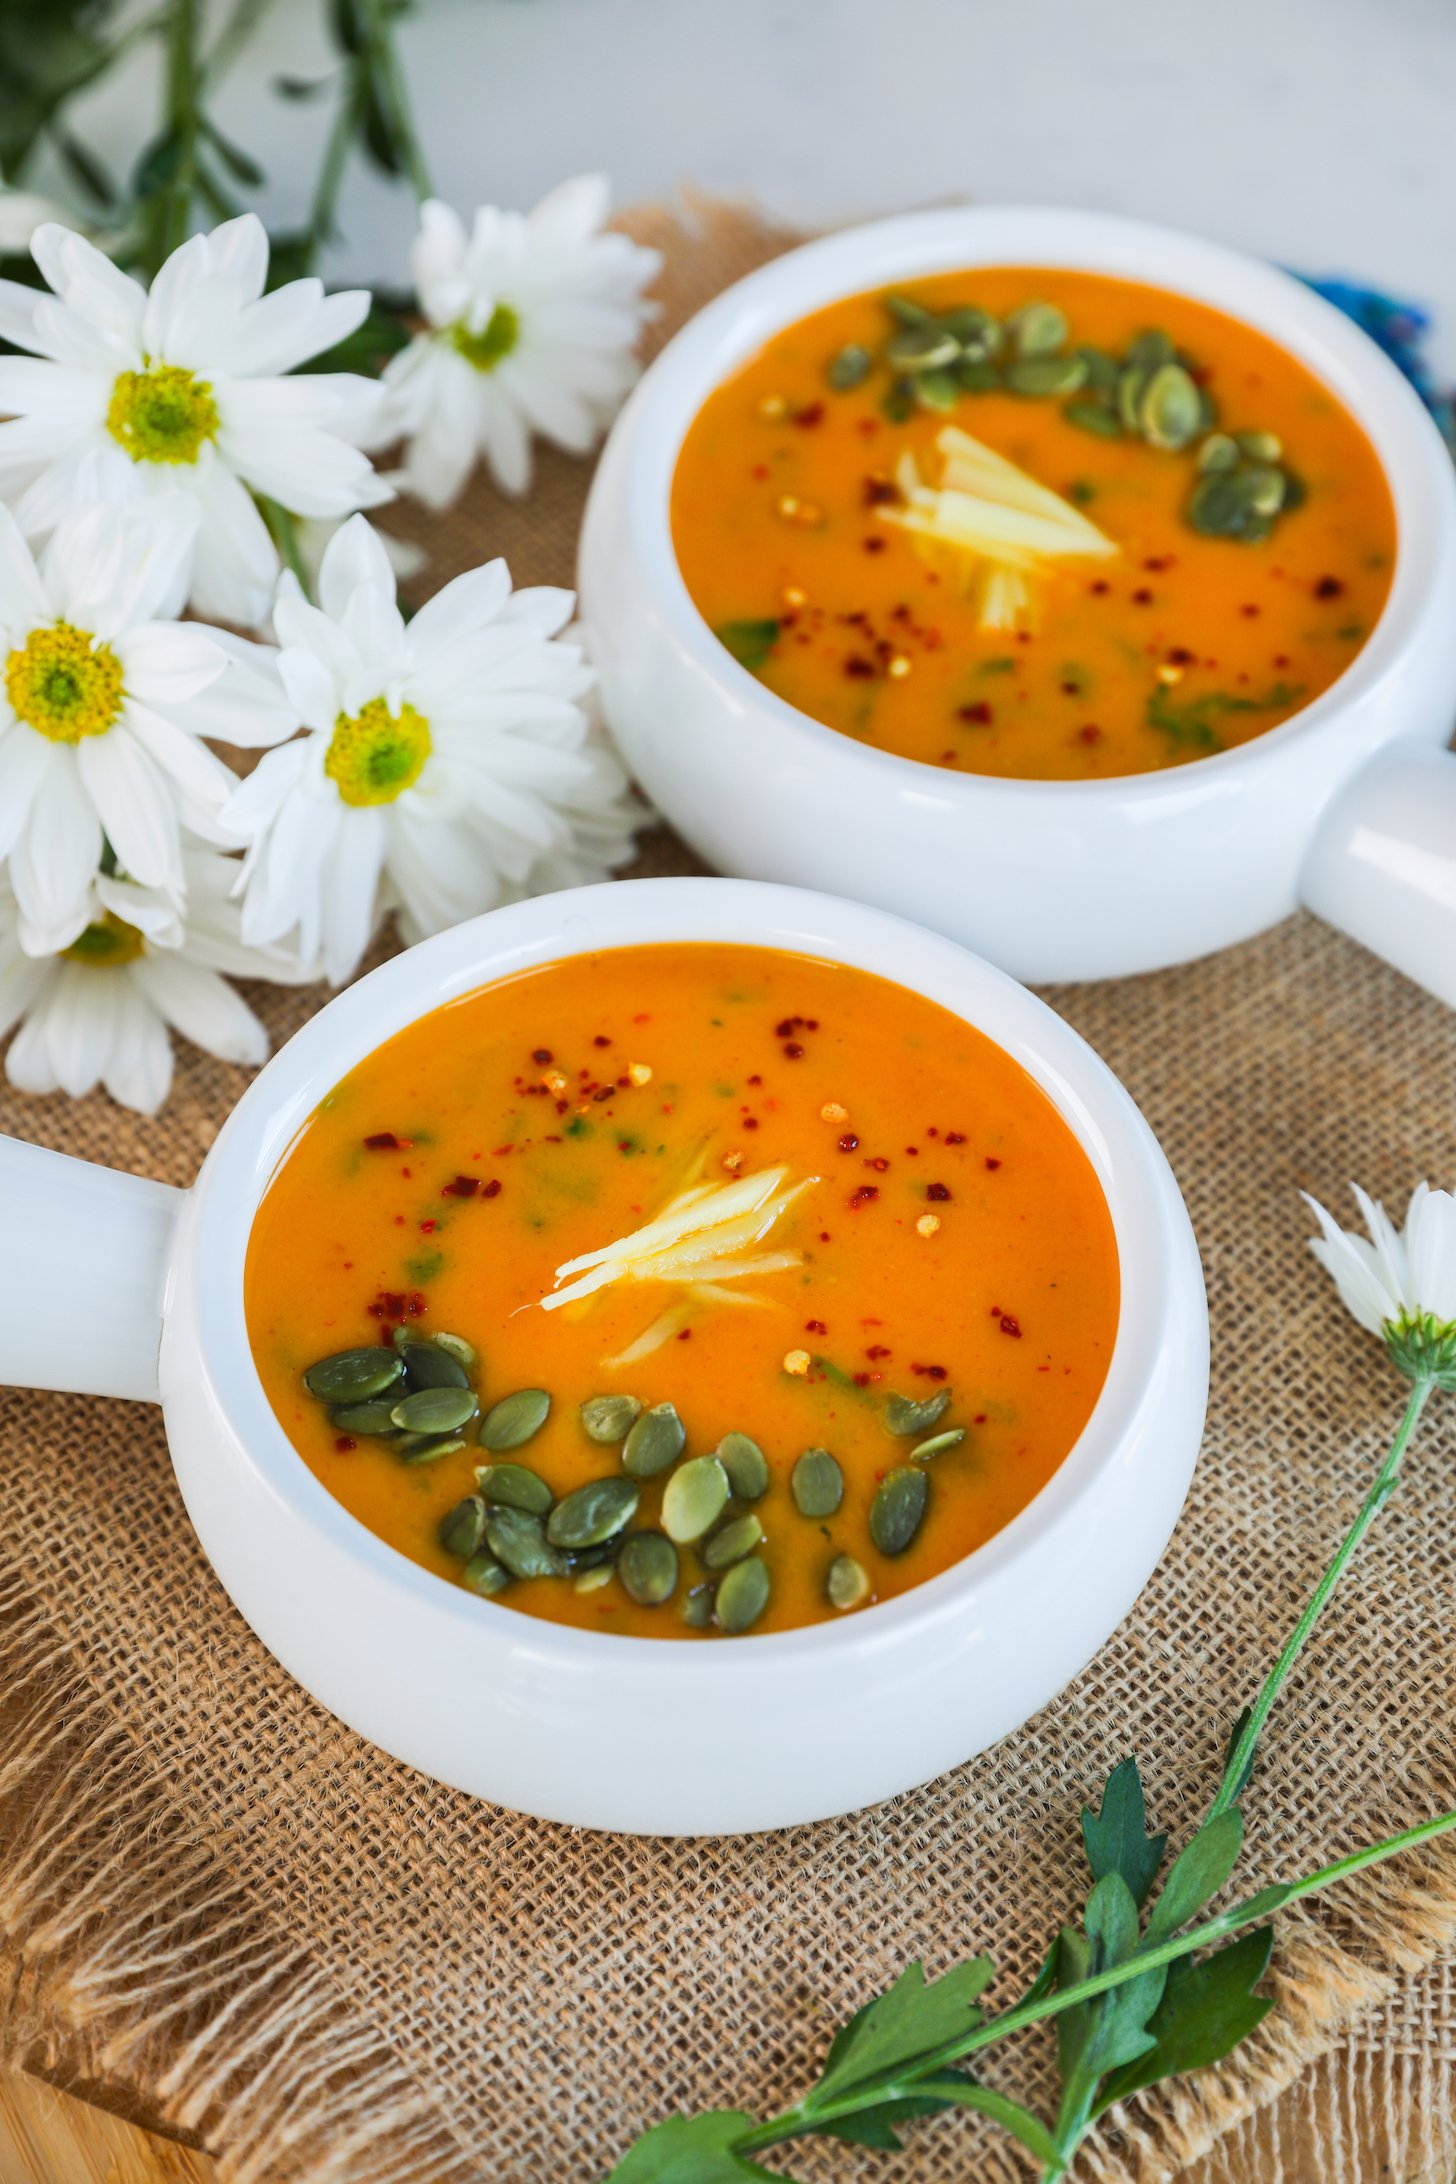 A perspective shot capturing two bowls of vibrant orange-hued soup adorned with seeds, ginger strips, and chilli flakes, complemented by white flowers in the background.